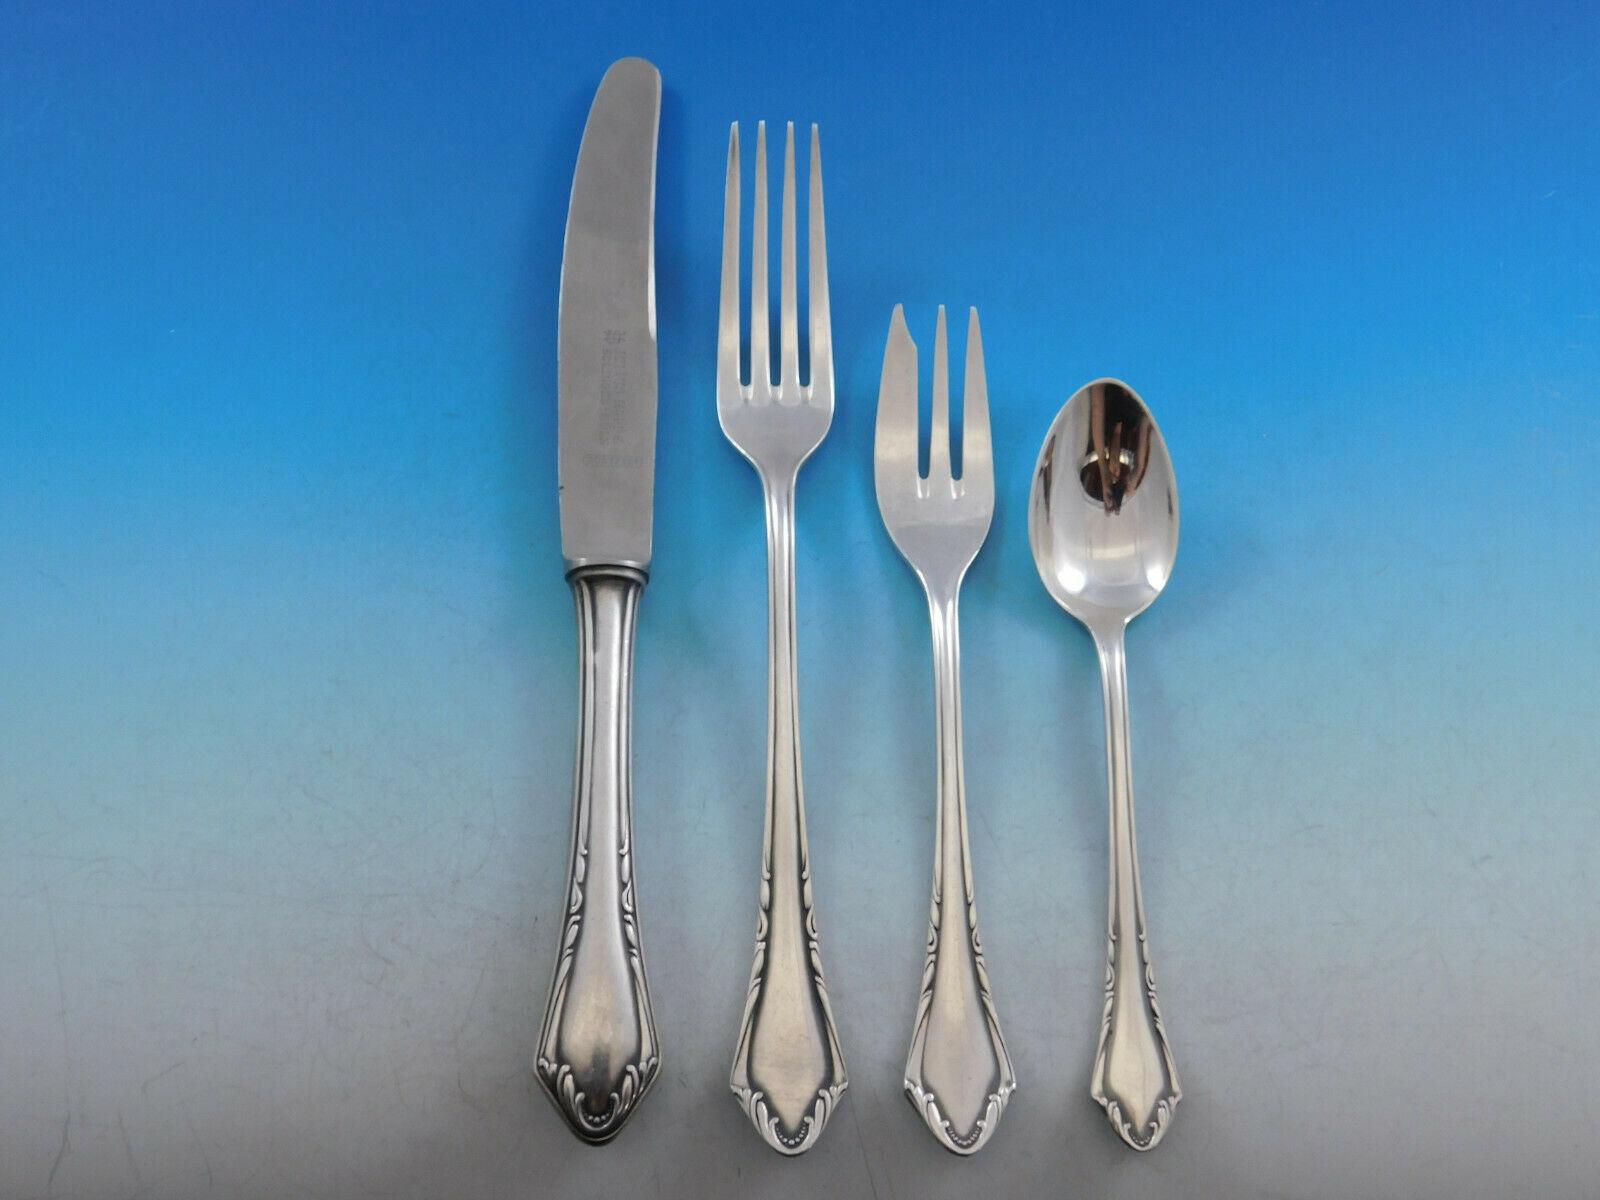 Weis Salad Server Fork Stainless Steel Silver 30 x 4 x 2 cm 